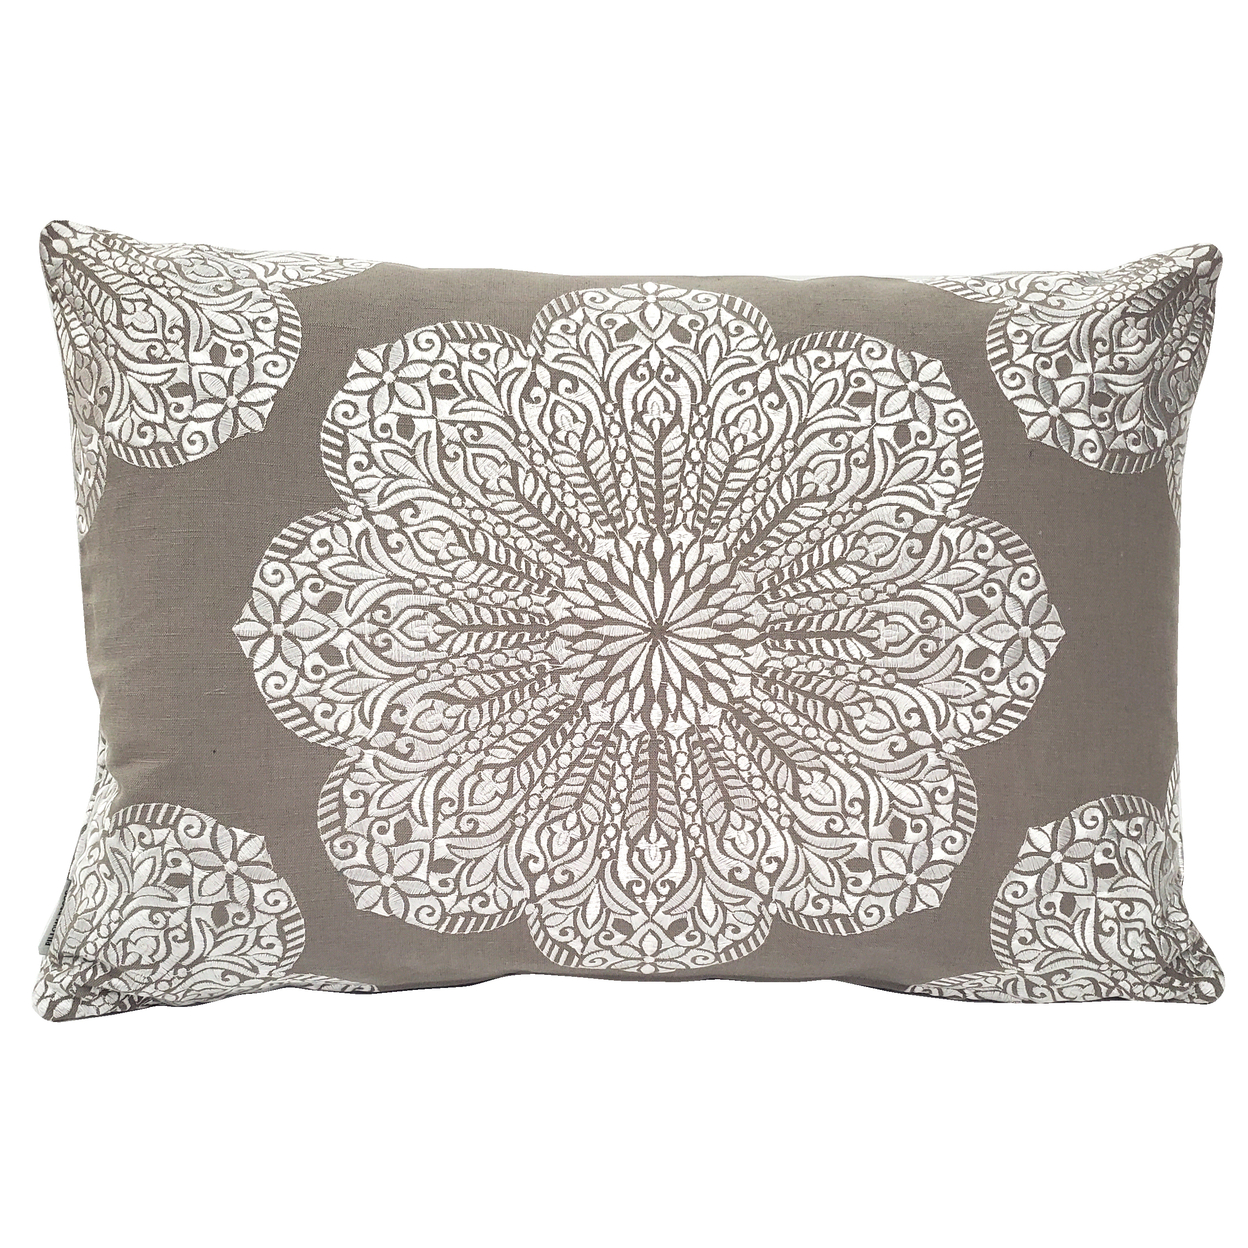 Mancini Dark Taupe And Silver Medallion Embroidered Throw Pillow 16x24, With Polyfill Insert